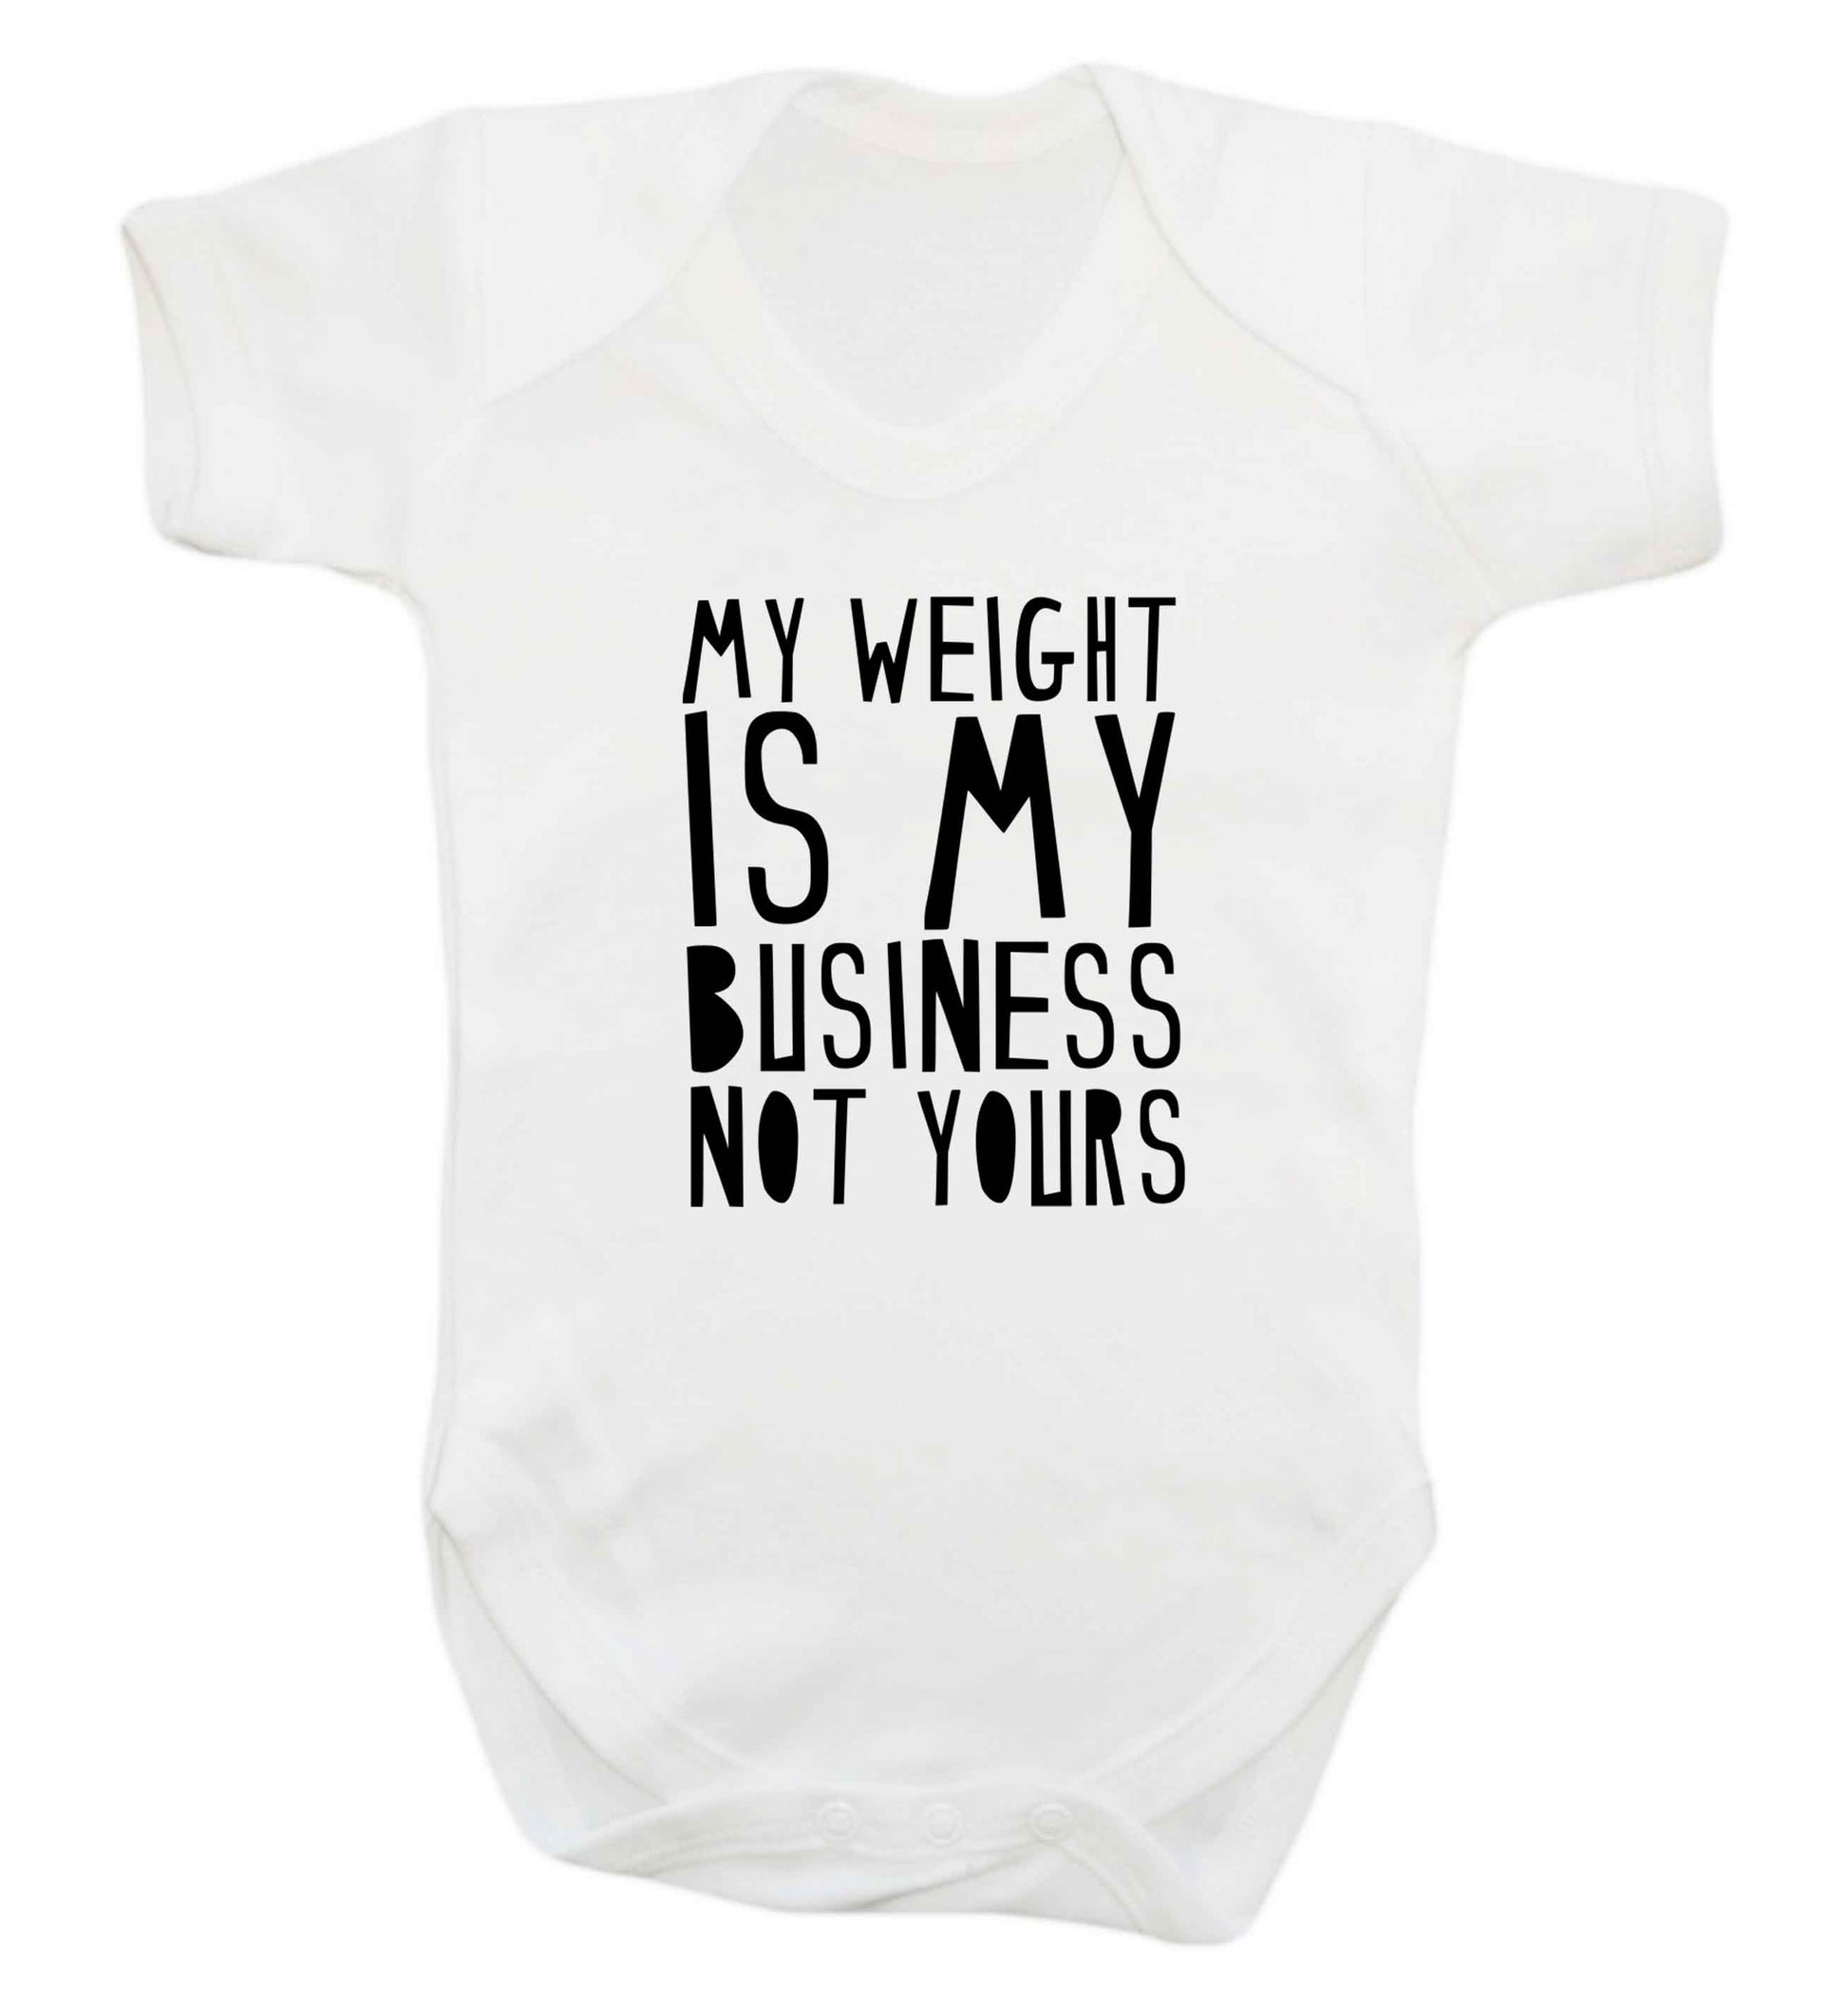 My weight is my business not yours baby vest white 18-24 months